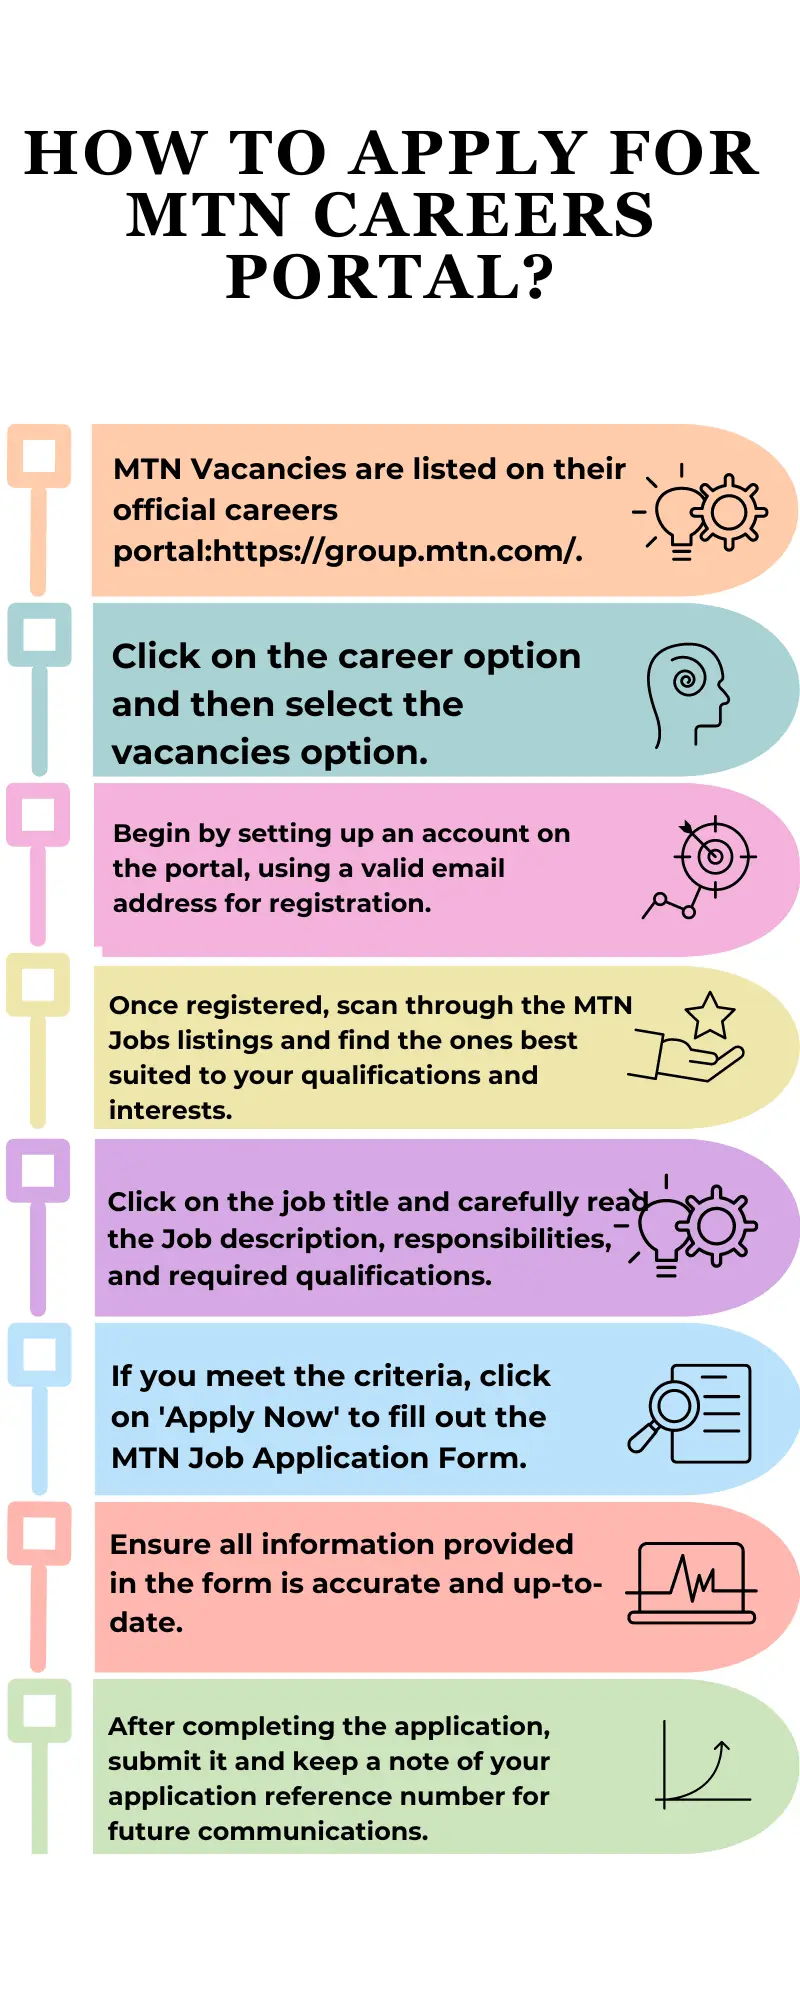 How To Apply for MTN Careers Portal?